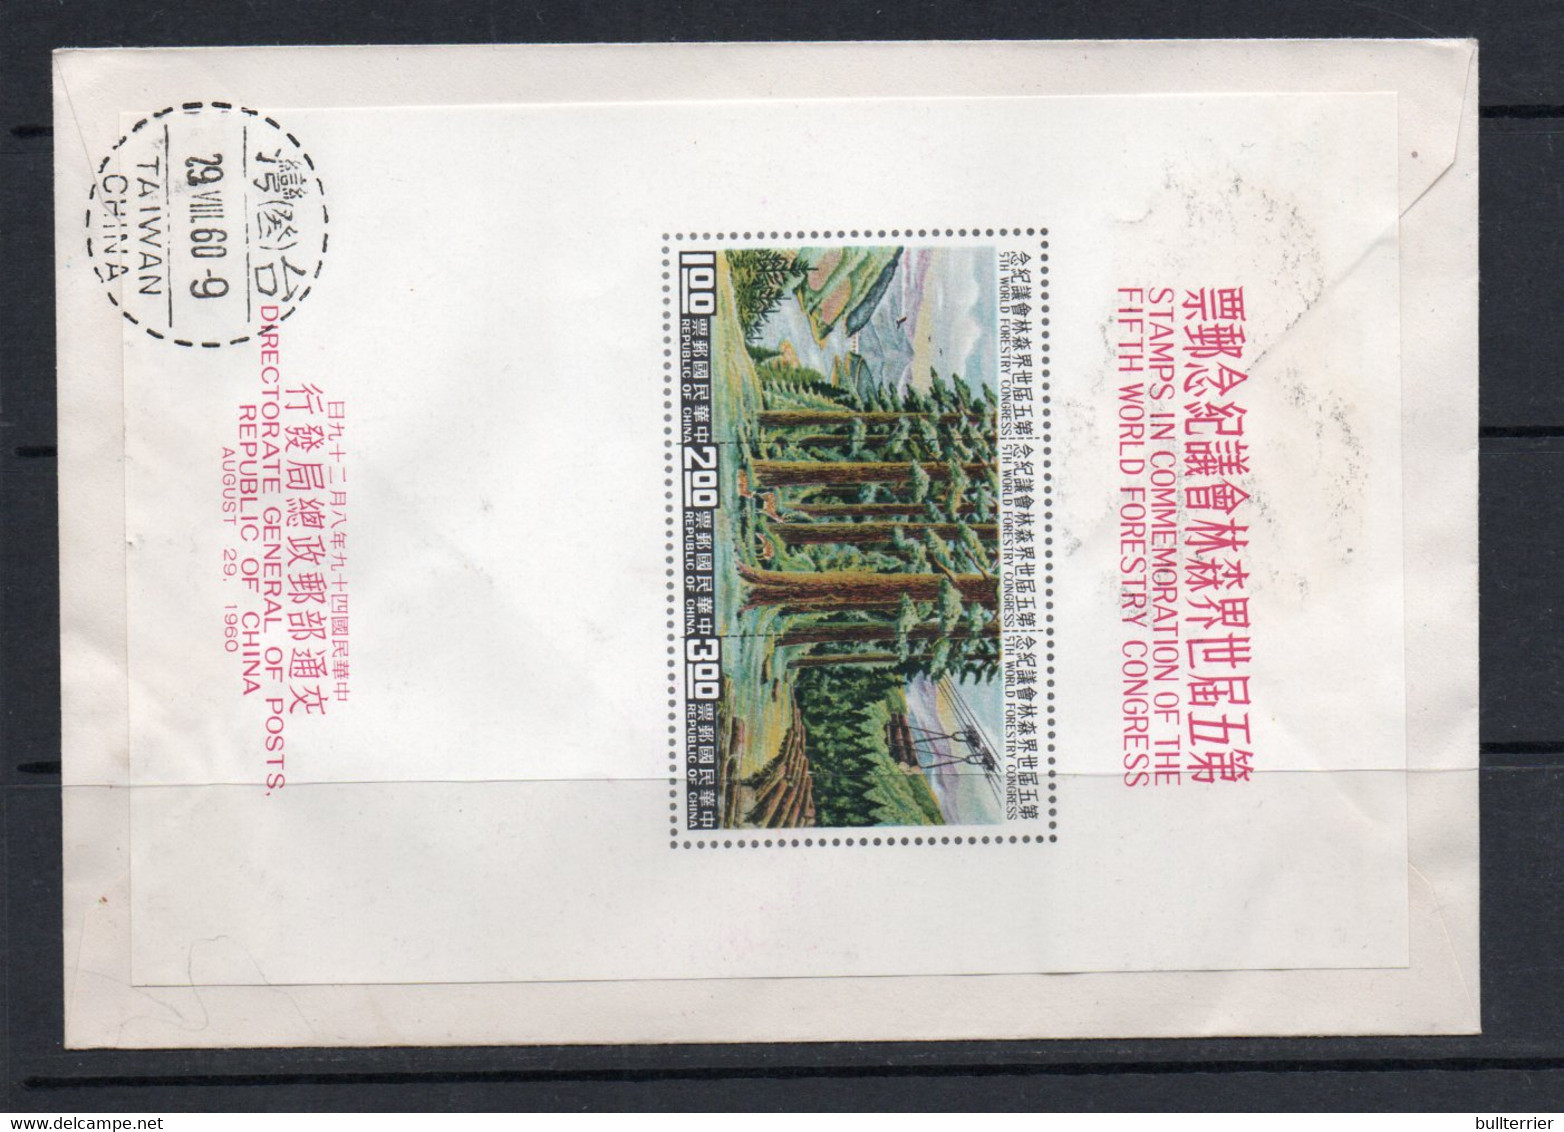 TAIWAN - 1960 FORESTRY SOUVENIR SHEET ON FIRST DAY COVER - Briefe U. Dokumente